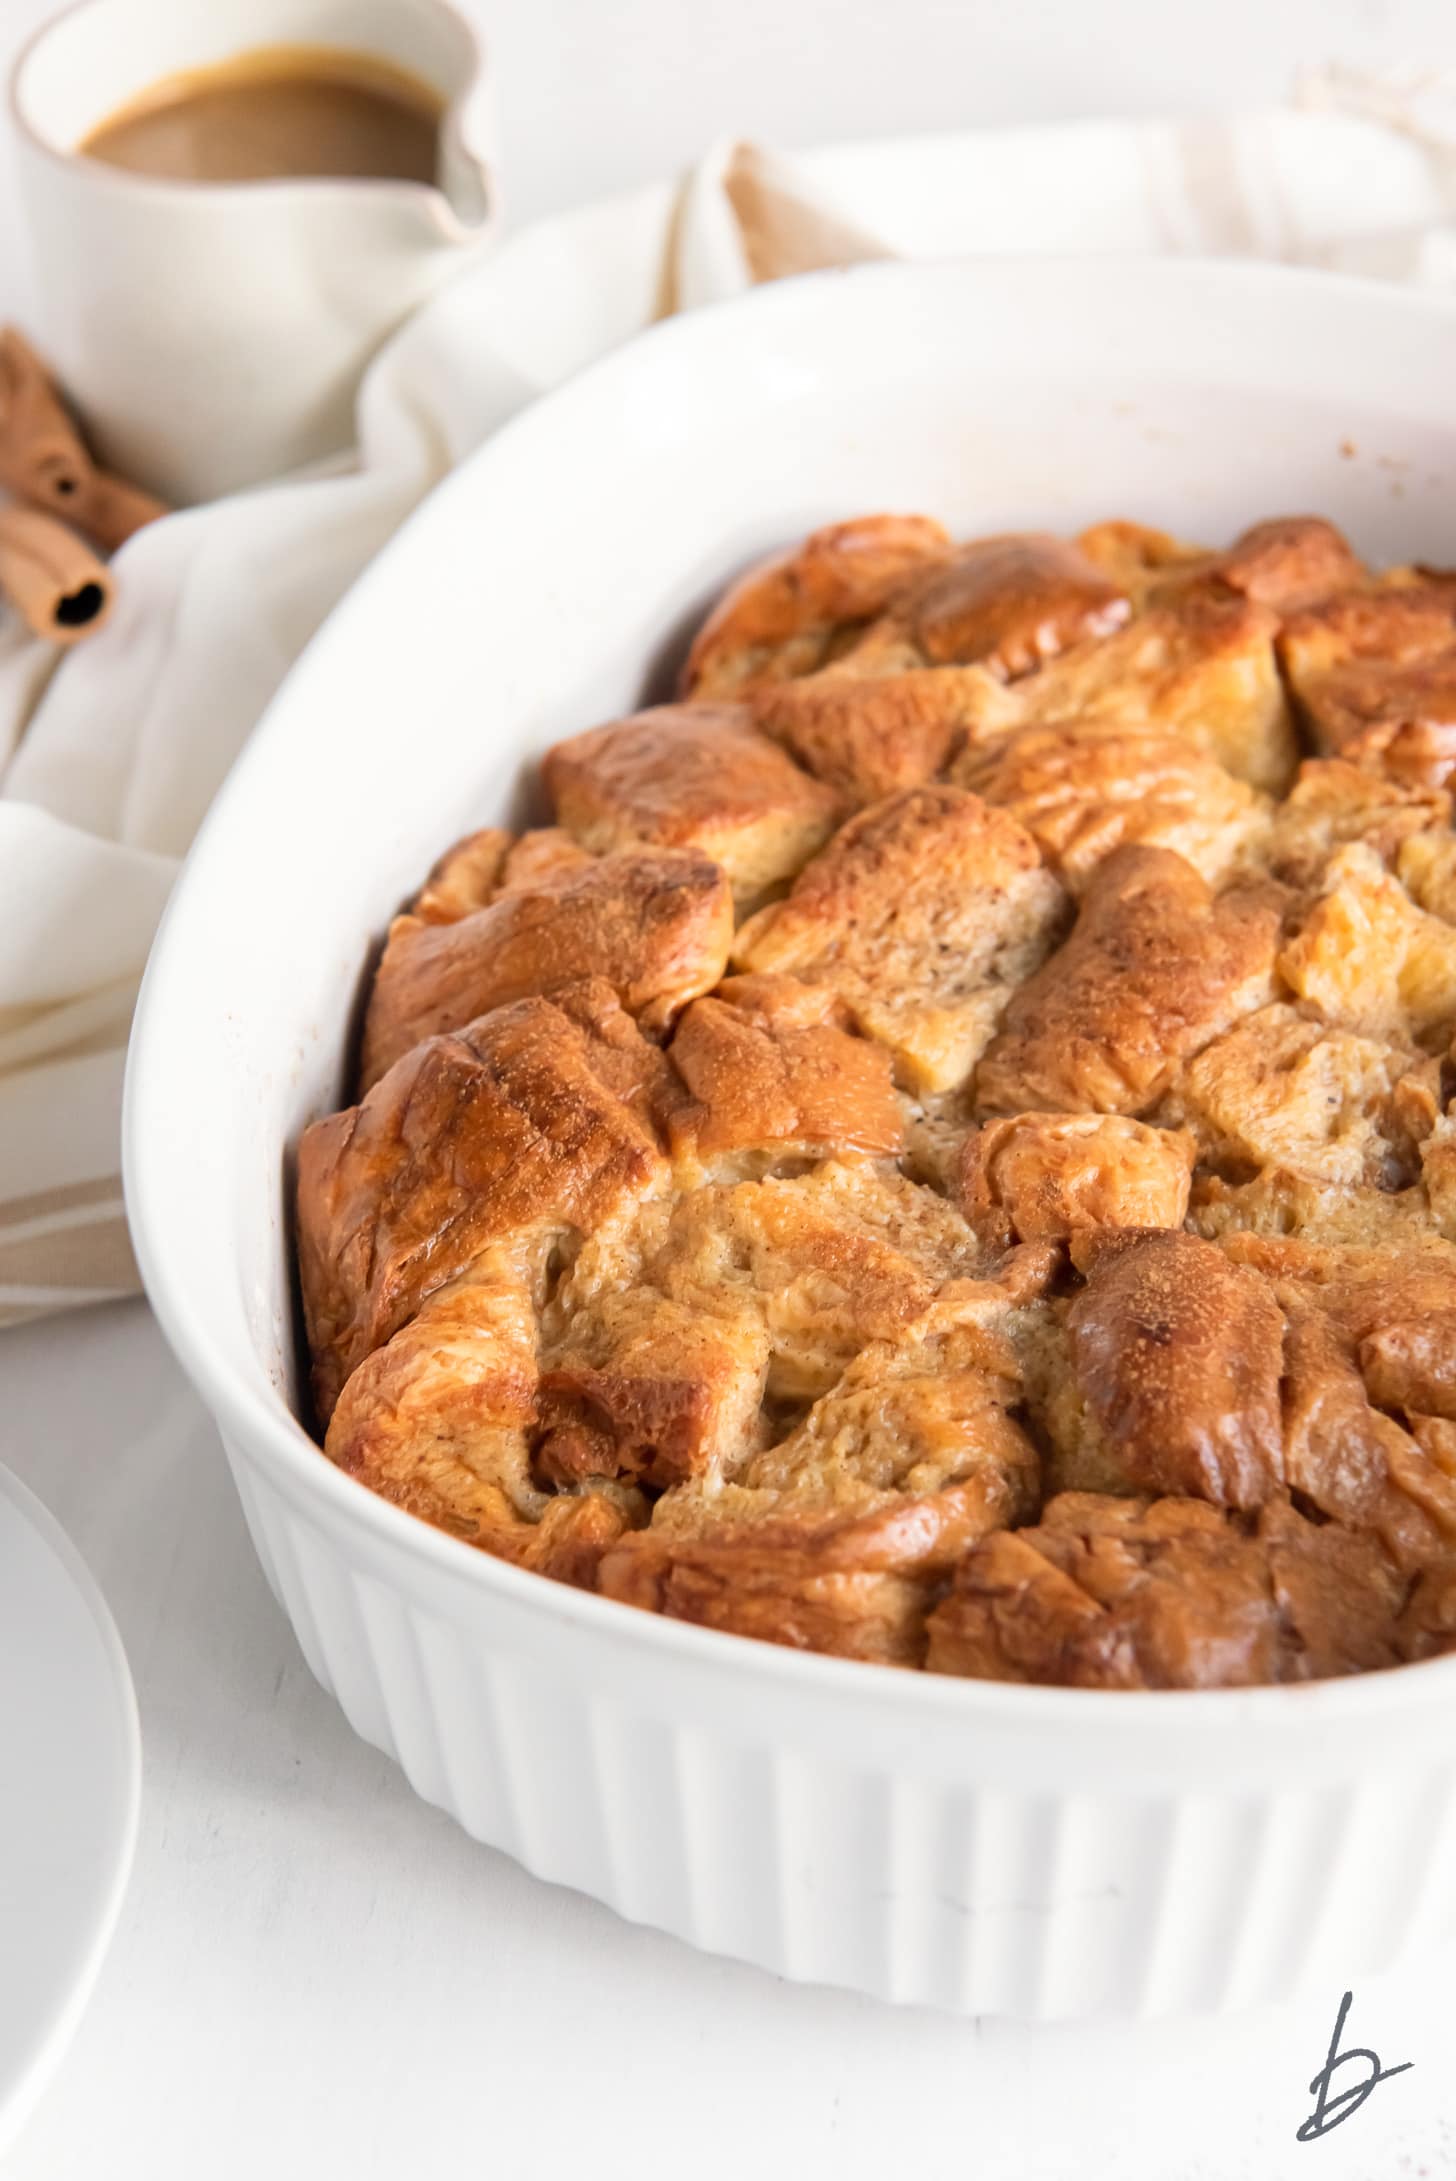 bread pudding with crispy golden top  in a white baking dish.